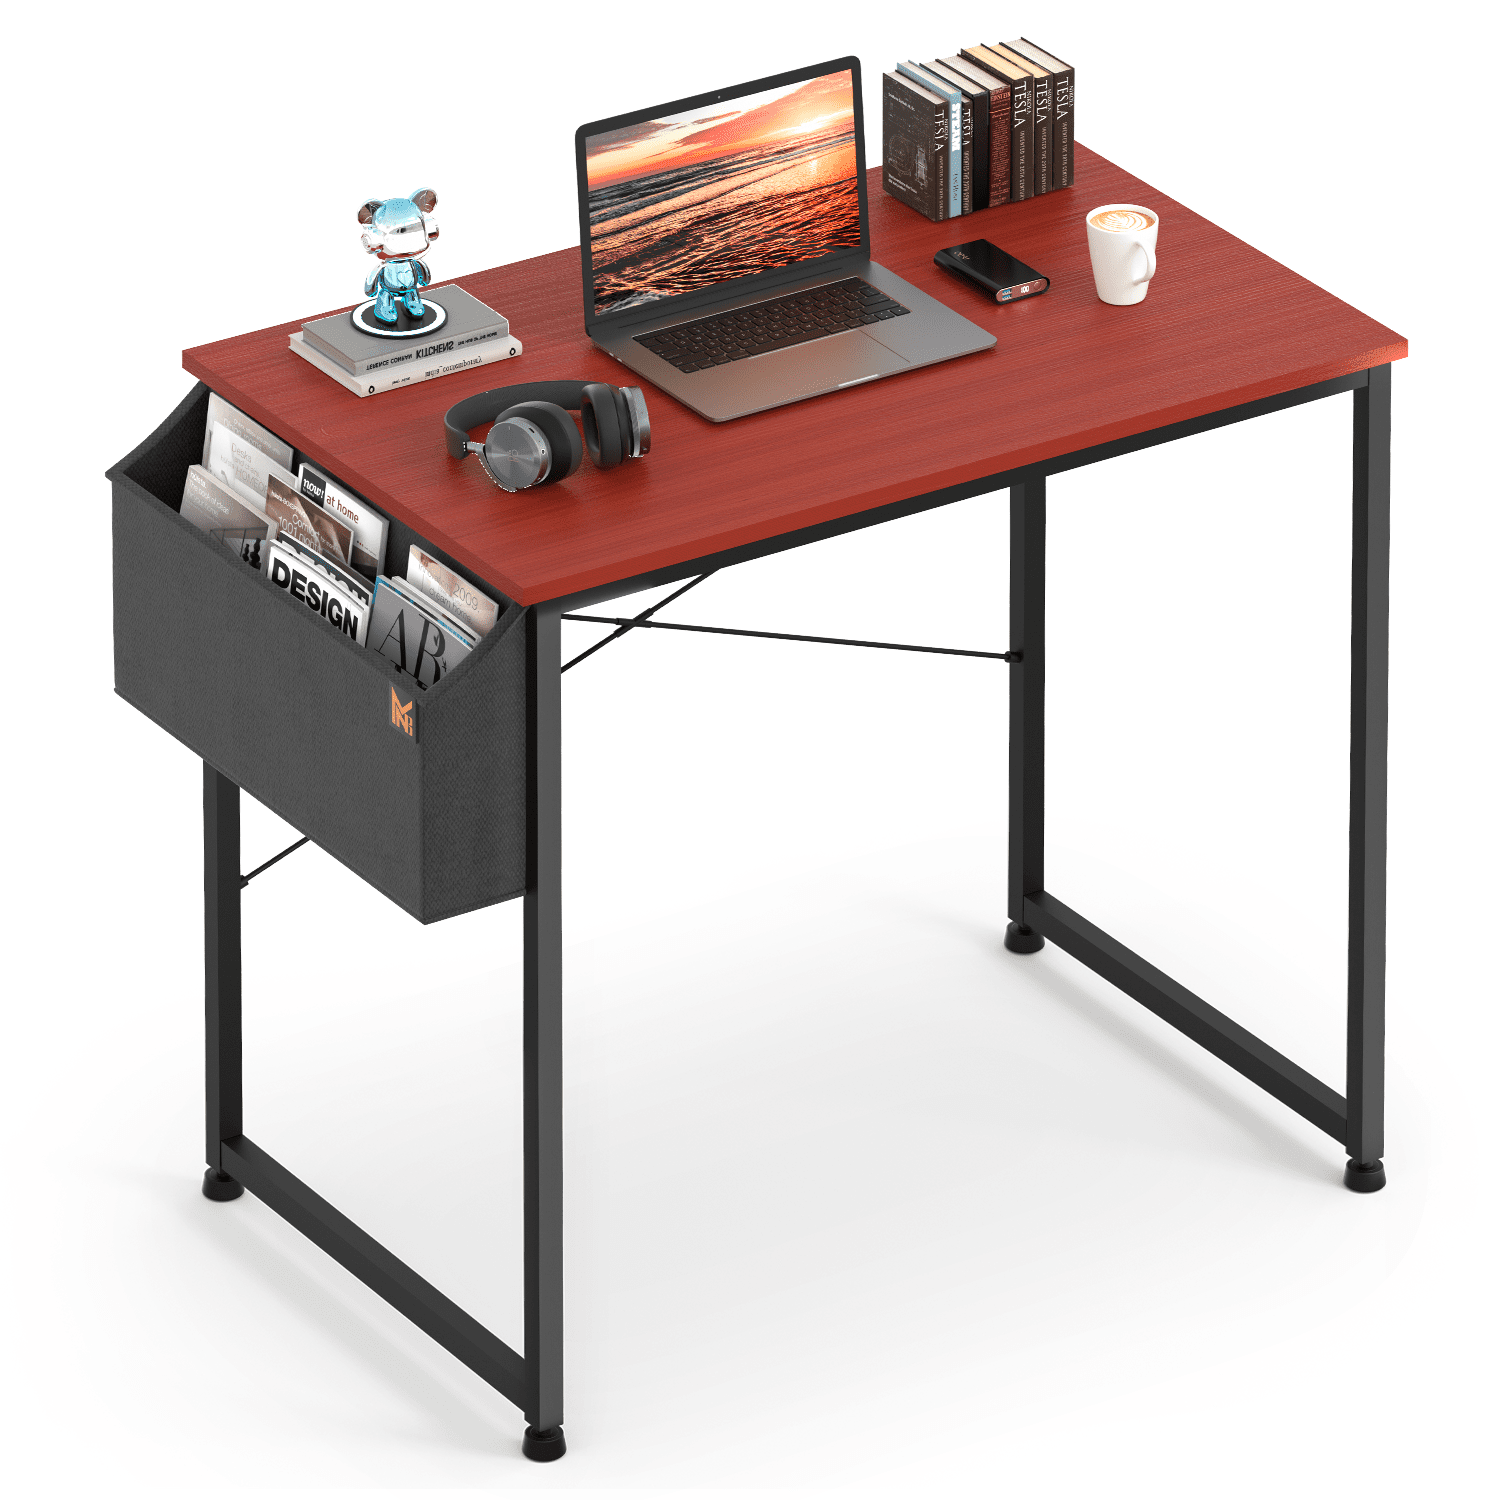 43in Computer Desk Black Computer Table PC Laptop Gaming Desk Modern  Writing Study Table w/Thick Metal Legs for Home Office Workstation